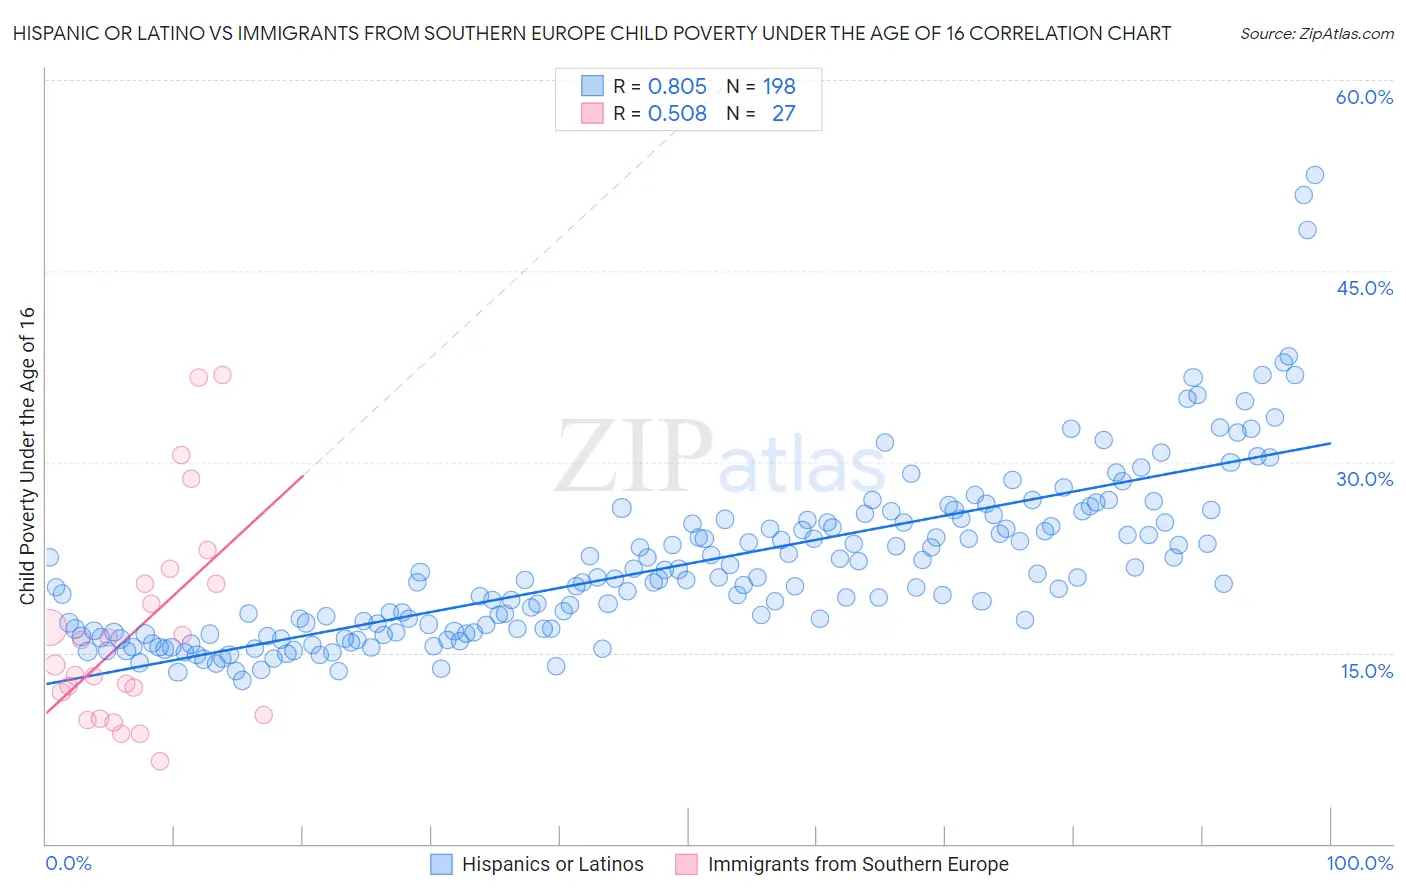 Hispanic or Latino vs Immigrants from Southern Europe Child Poverty Under the Age of 16